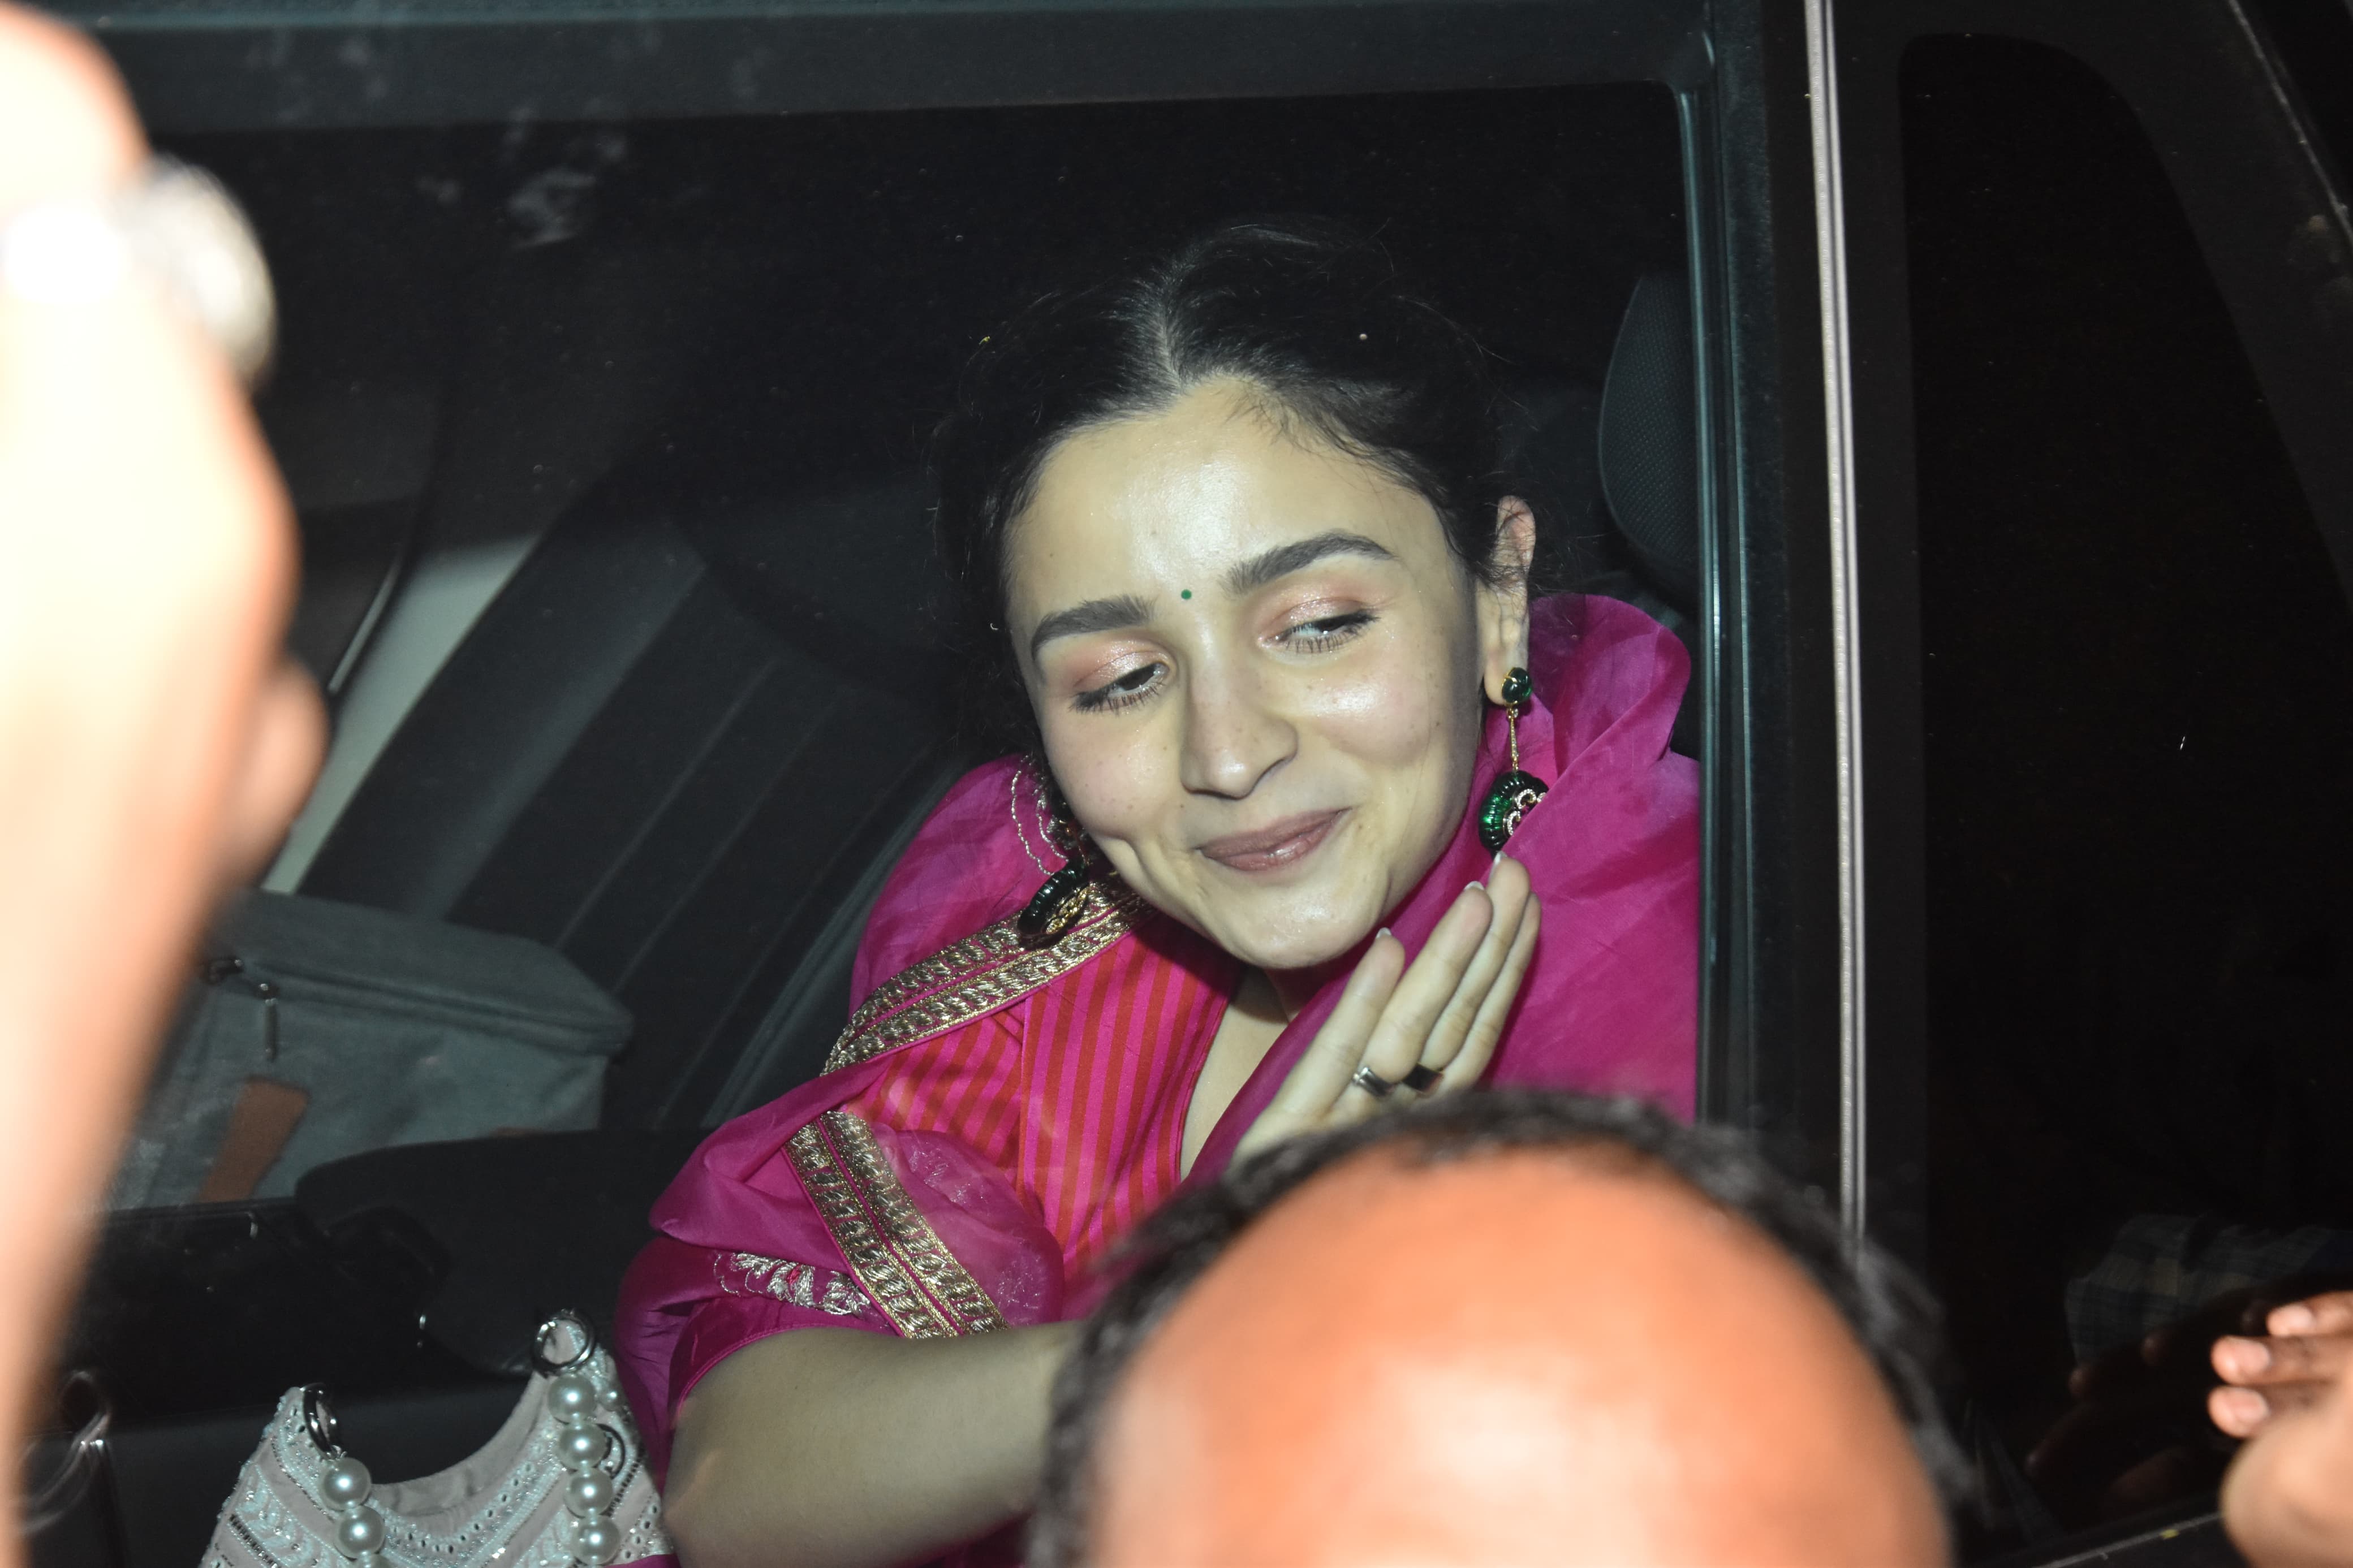 Alia Bhatt looked stunning in a pink traditional attire as she was clicked in the city